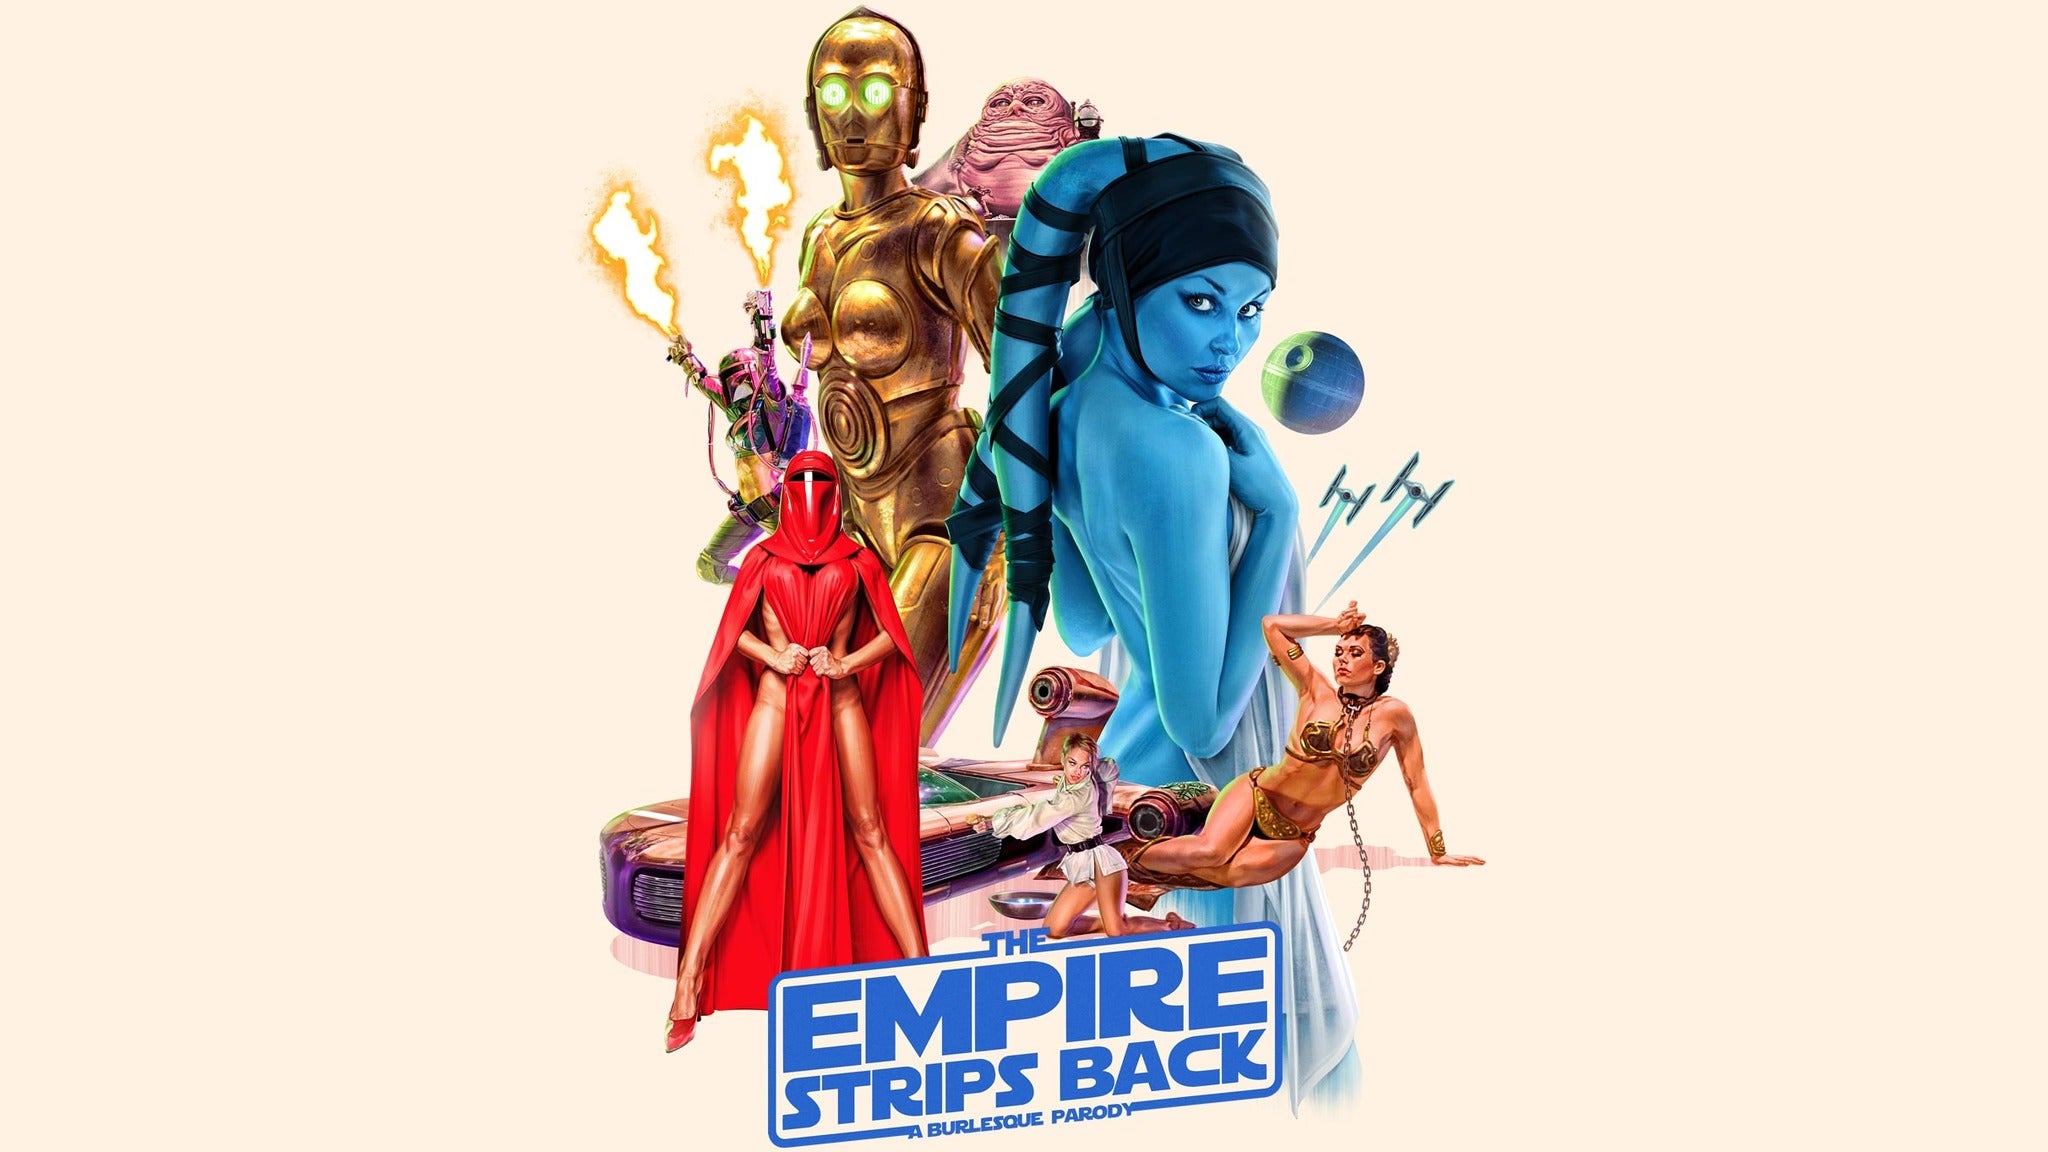 The Empire Strips Back: A Burlesque Parody in Phoenix promo photo for Ticketmaster presale offer code